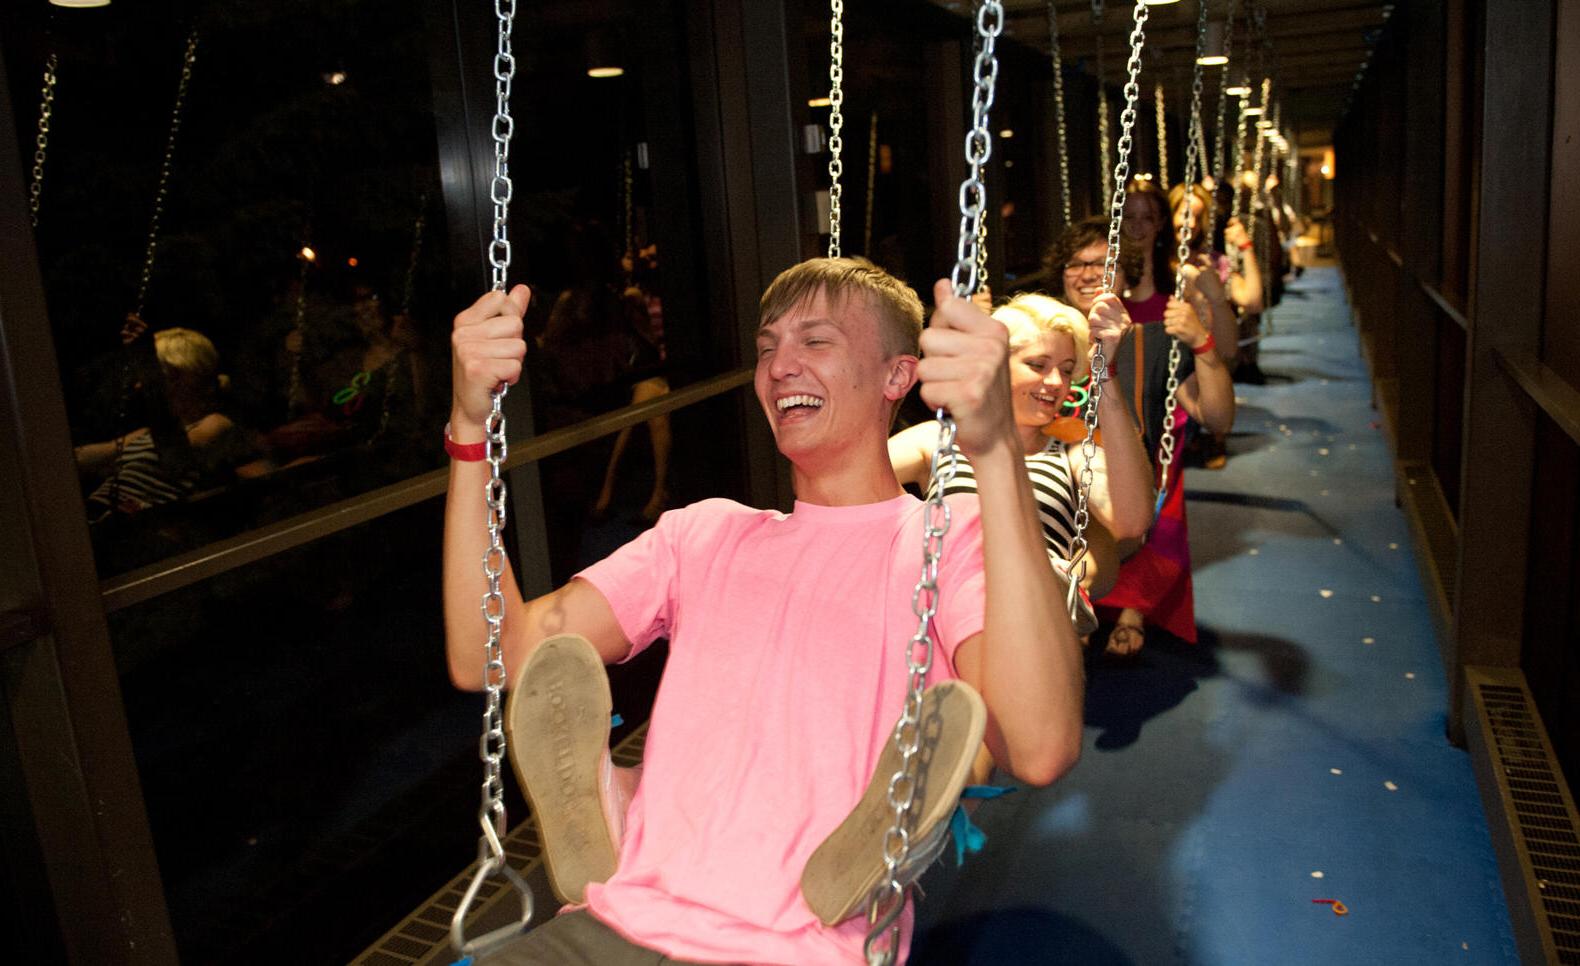 Students on swings in skyway during an event